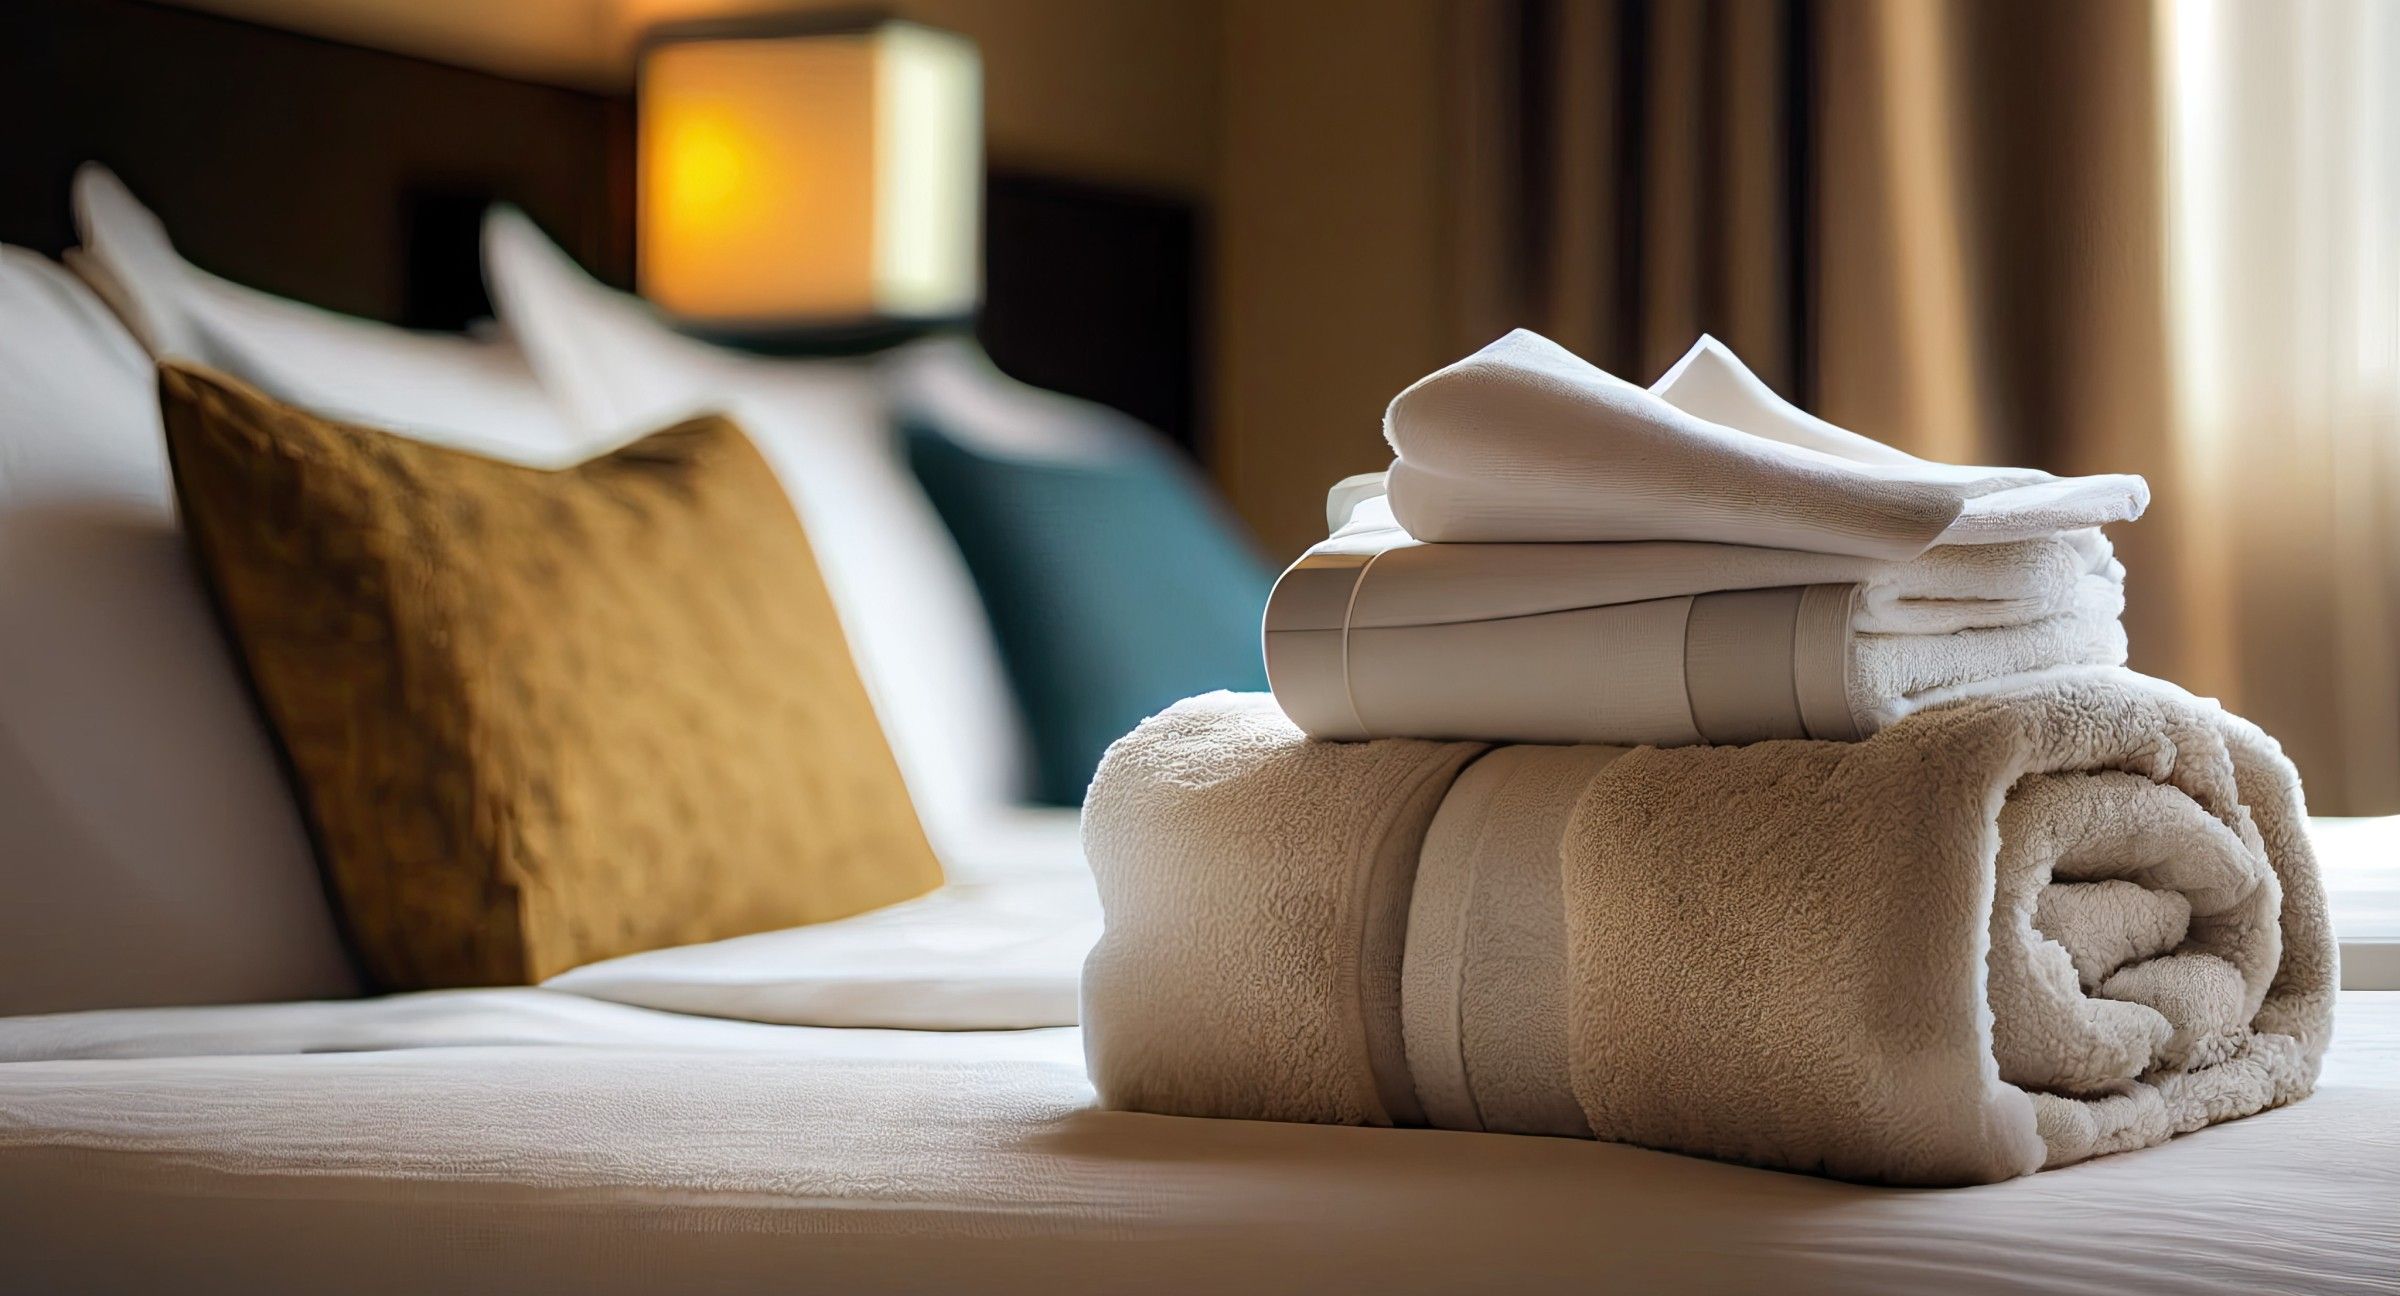  The Role of Cleanliness in Hotel Ratings